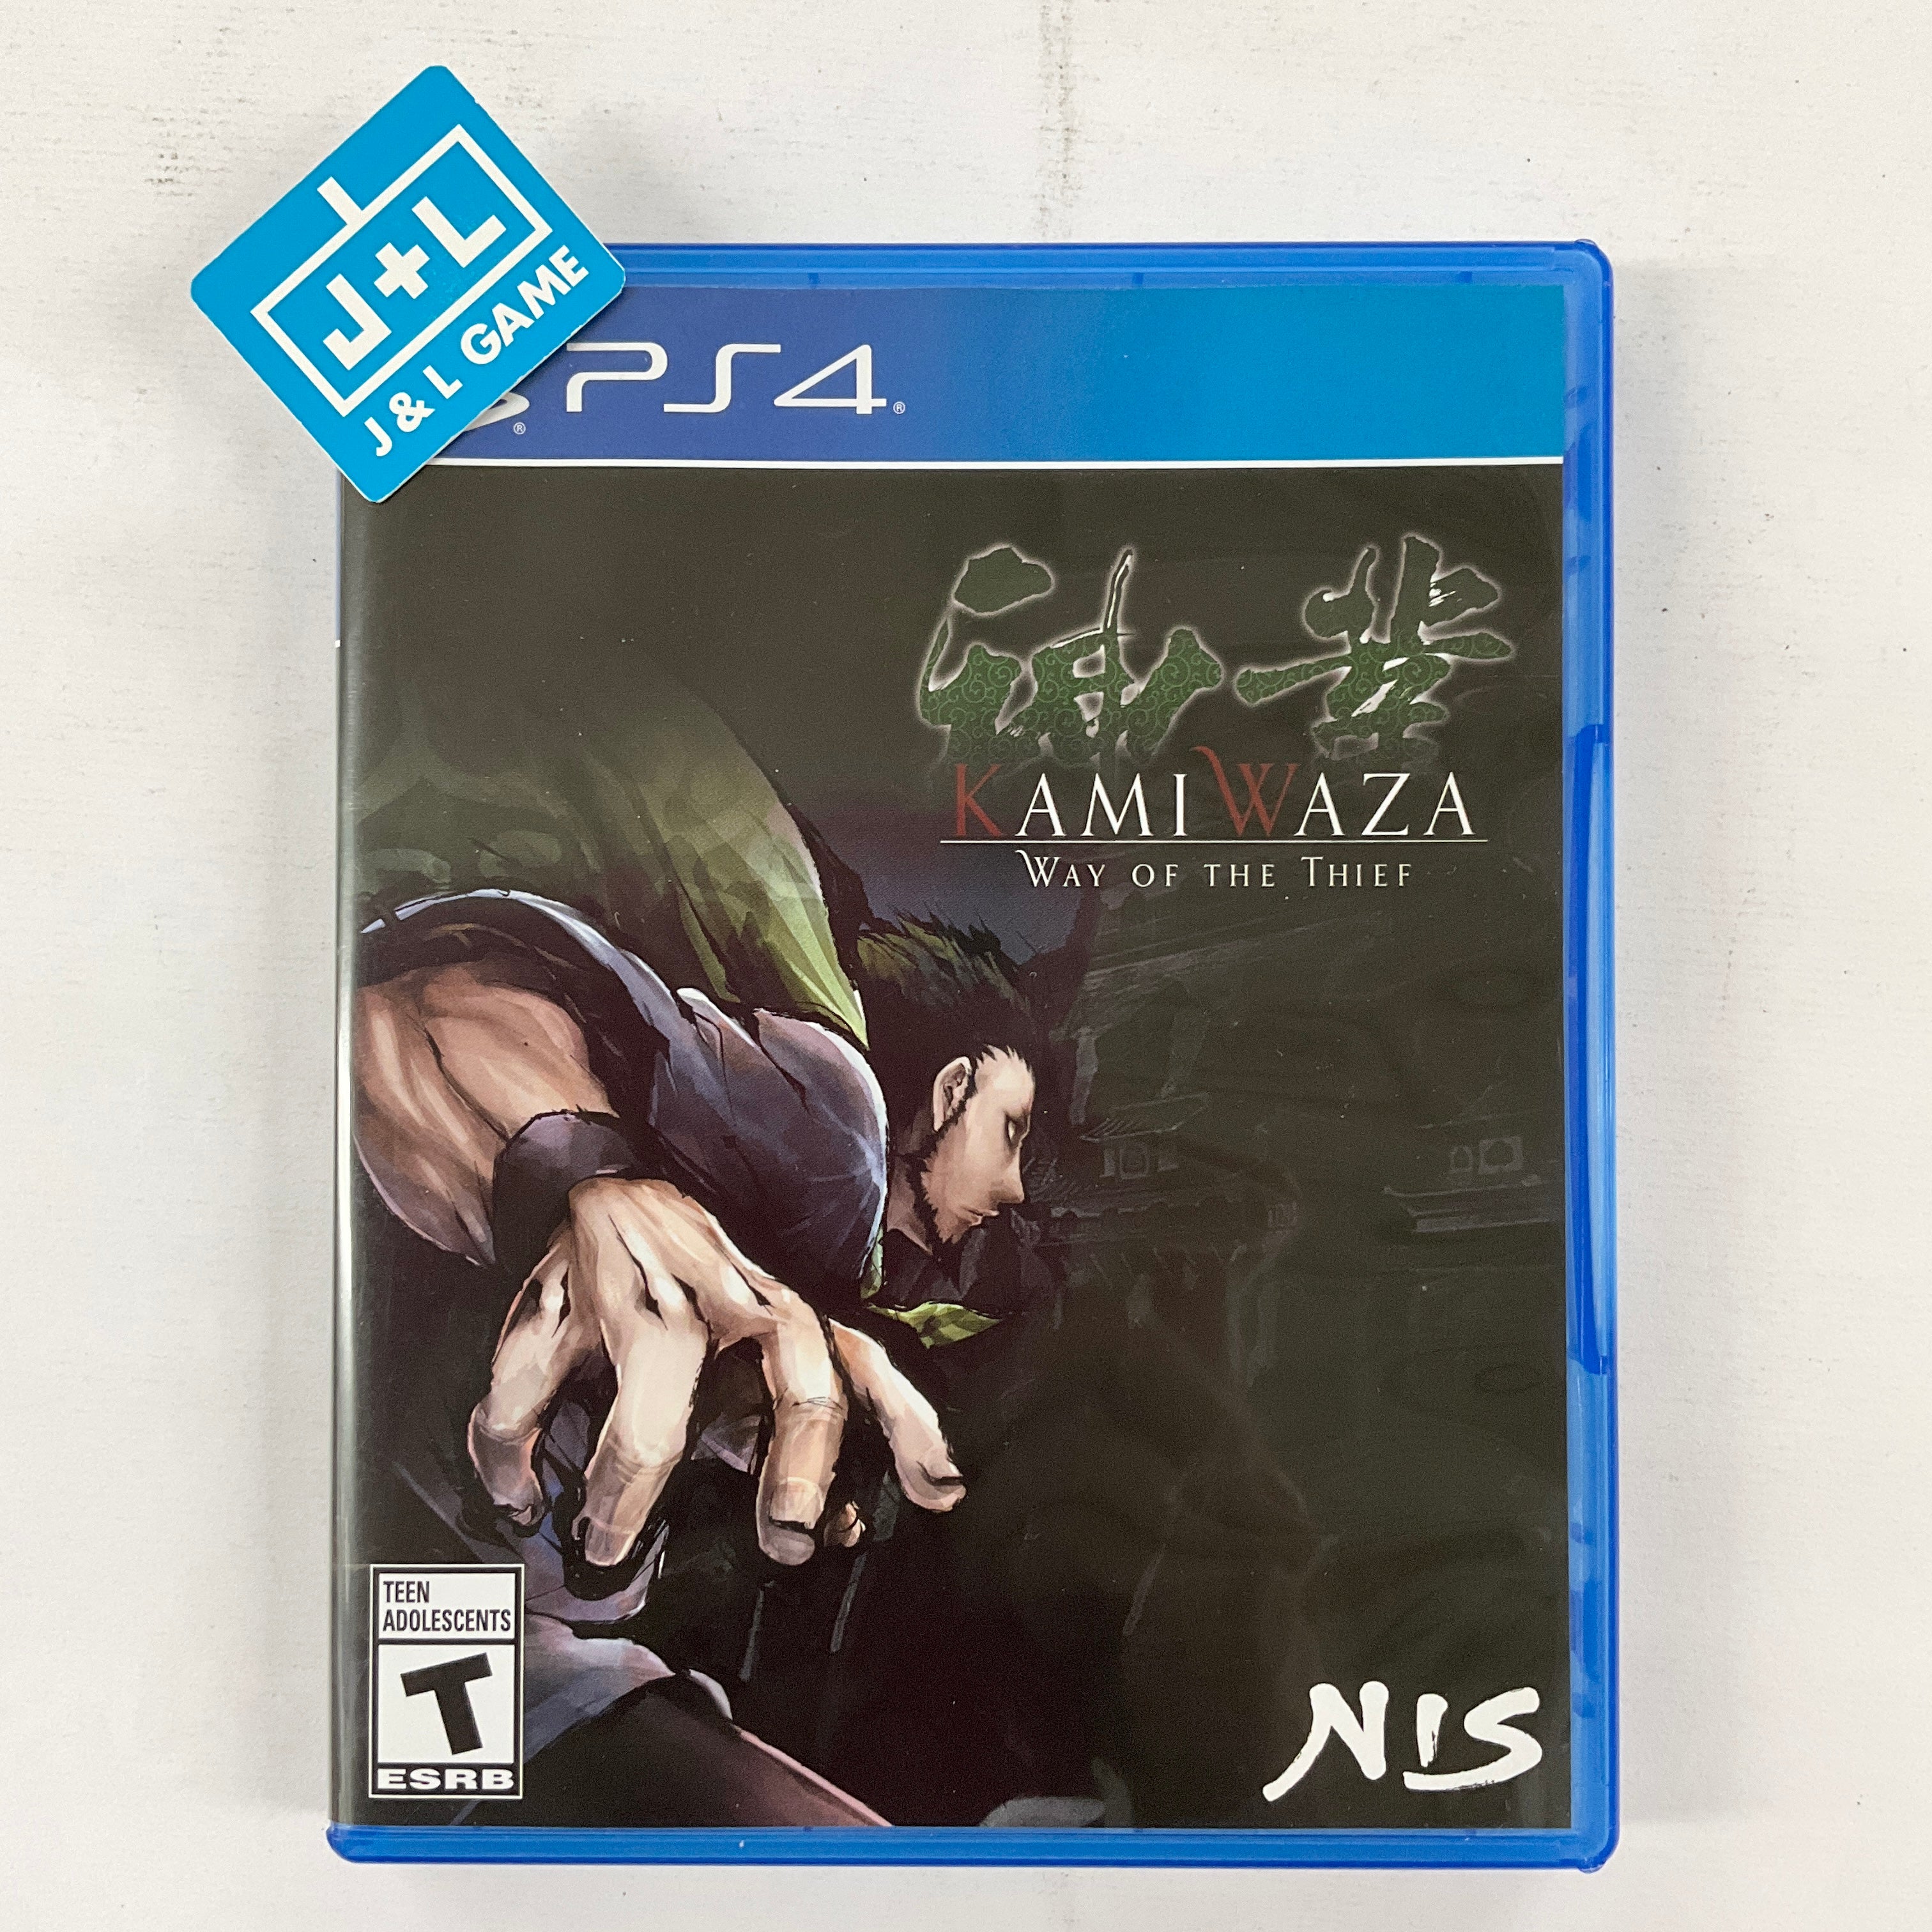 Kamiwaza: Way of the Thief - (PS4) PlayStation 4 [UNBOXING] Video Games NIS America   